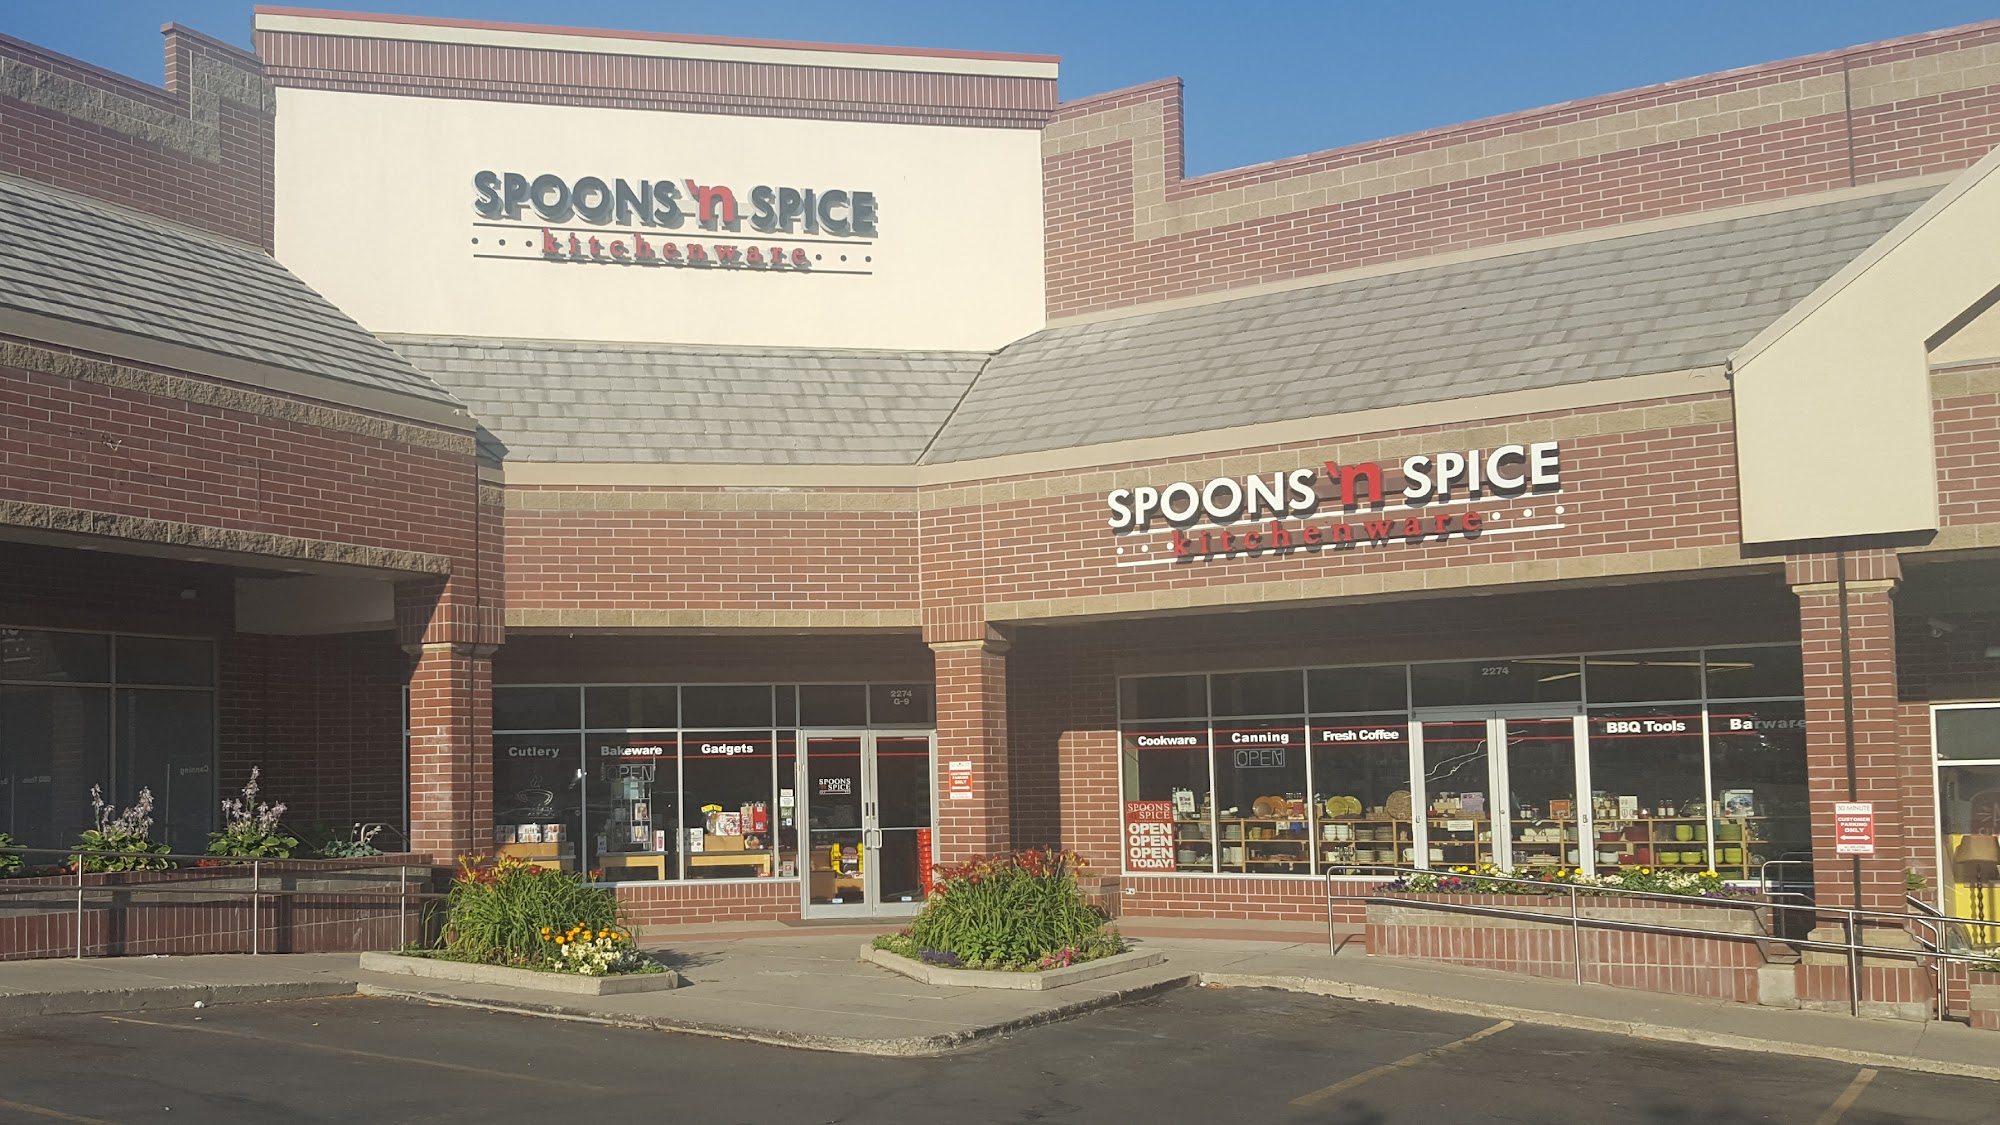 Spoons 'n Spice Kitchenware